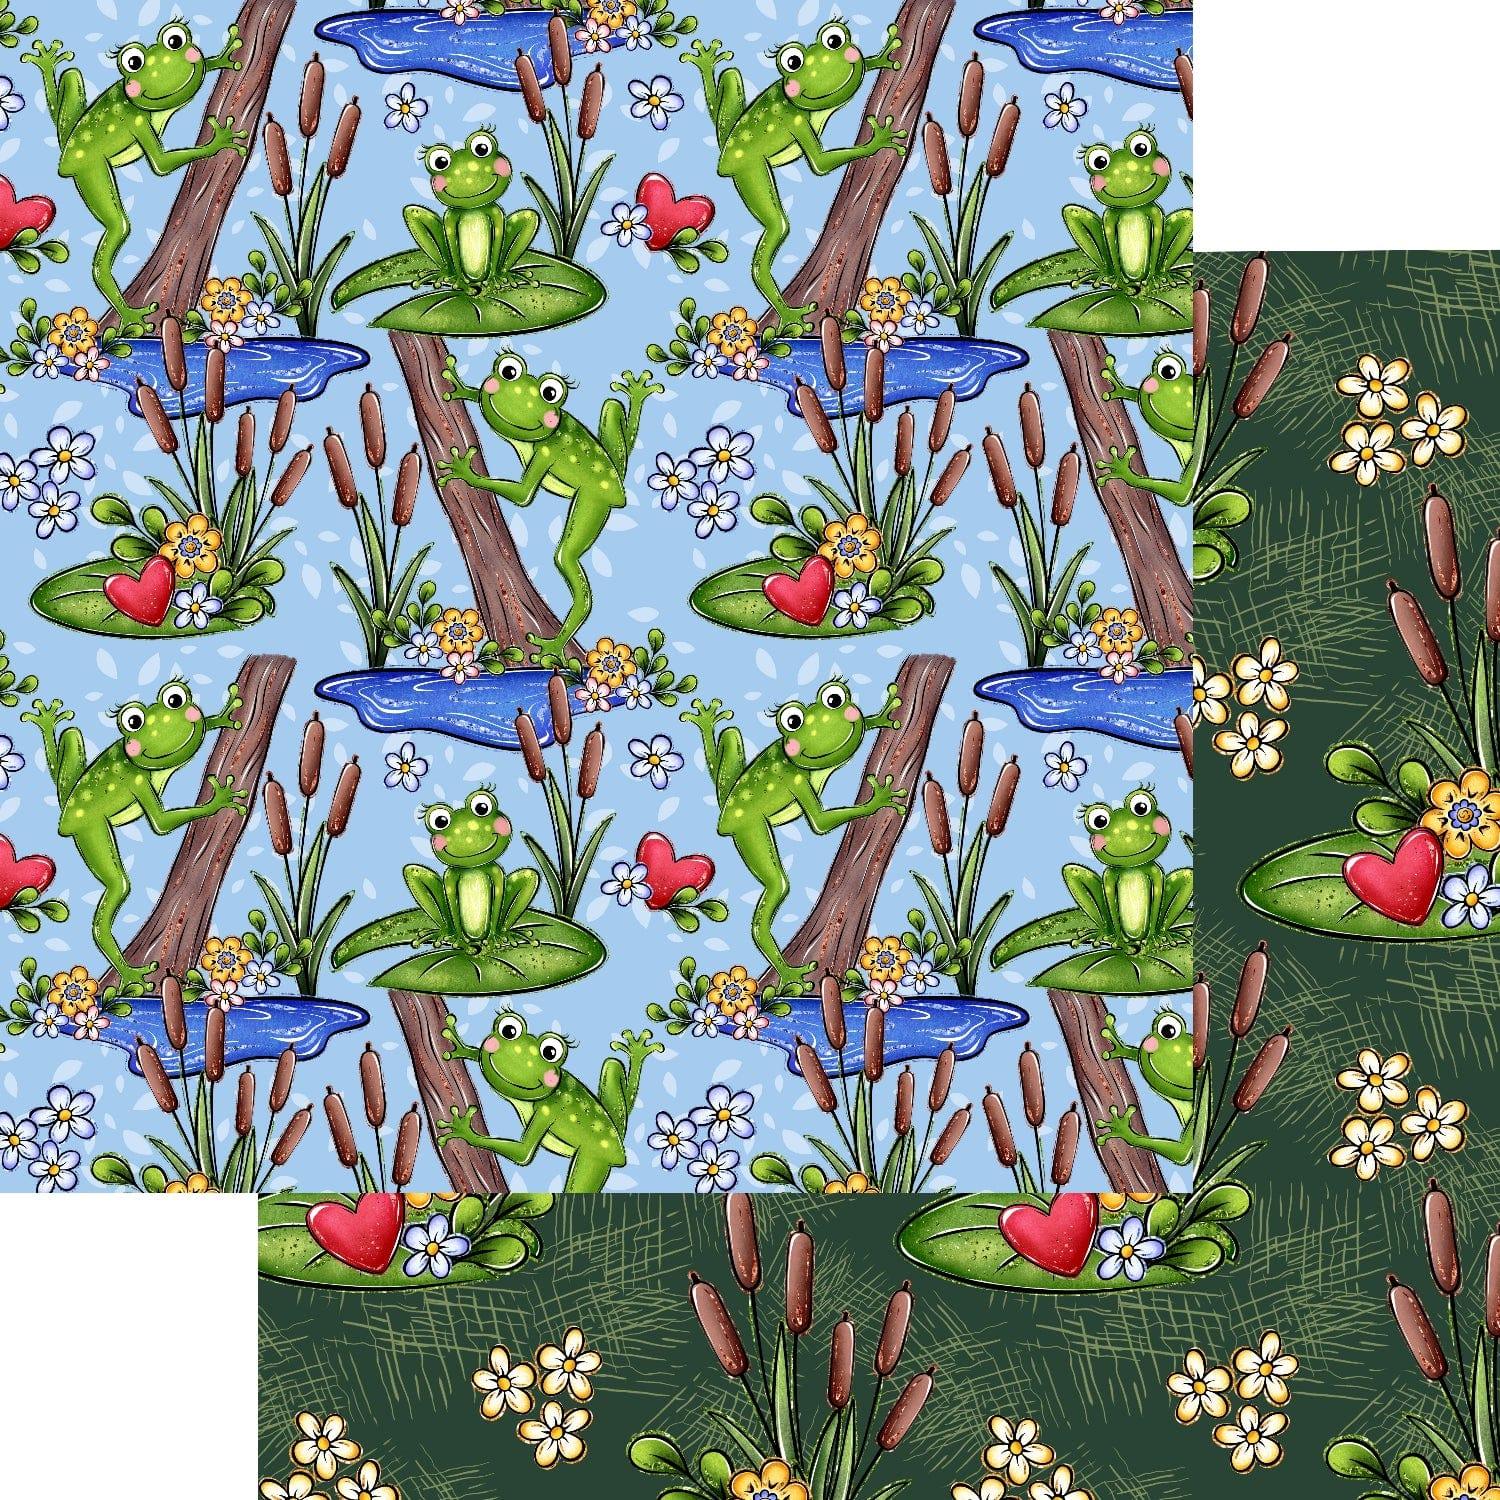 Phantasia Design's Frogs In The Morass Collection Tree Frogs 12 x 12 Double-Sided Scrapbook Paper by SSC Designs - Scrapbook Supply Companies